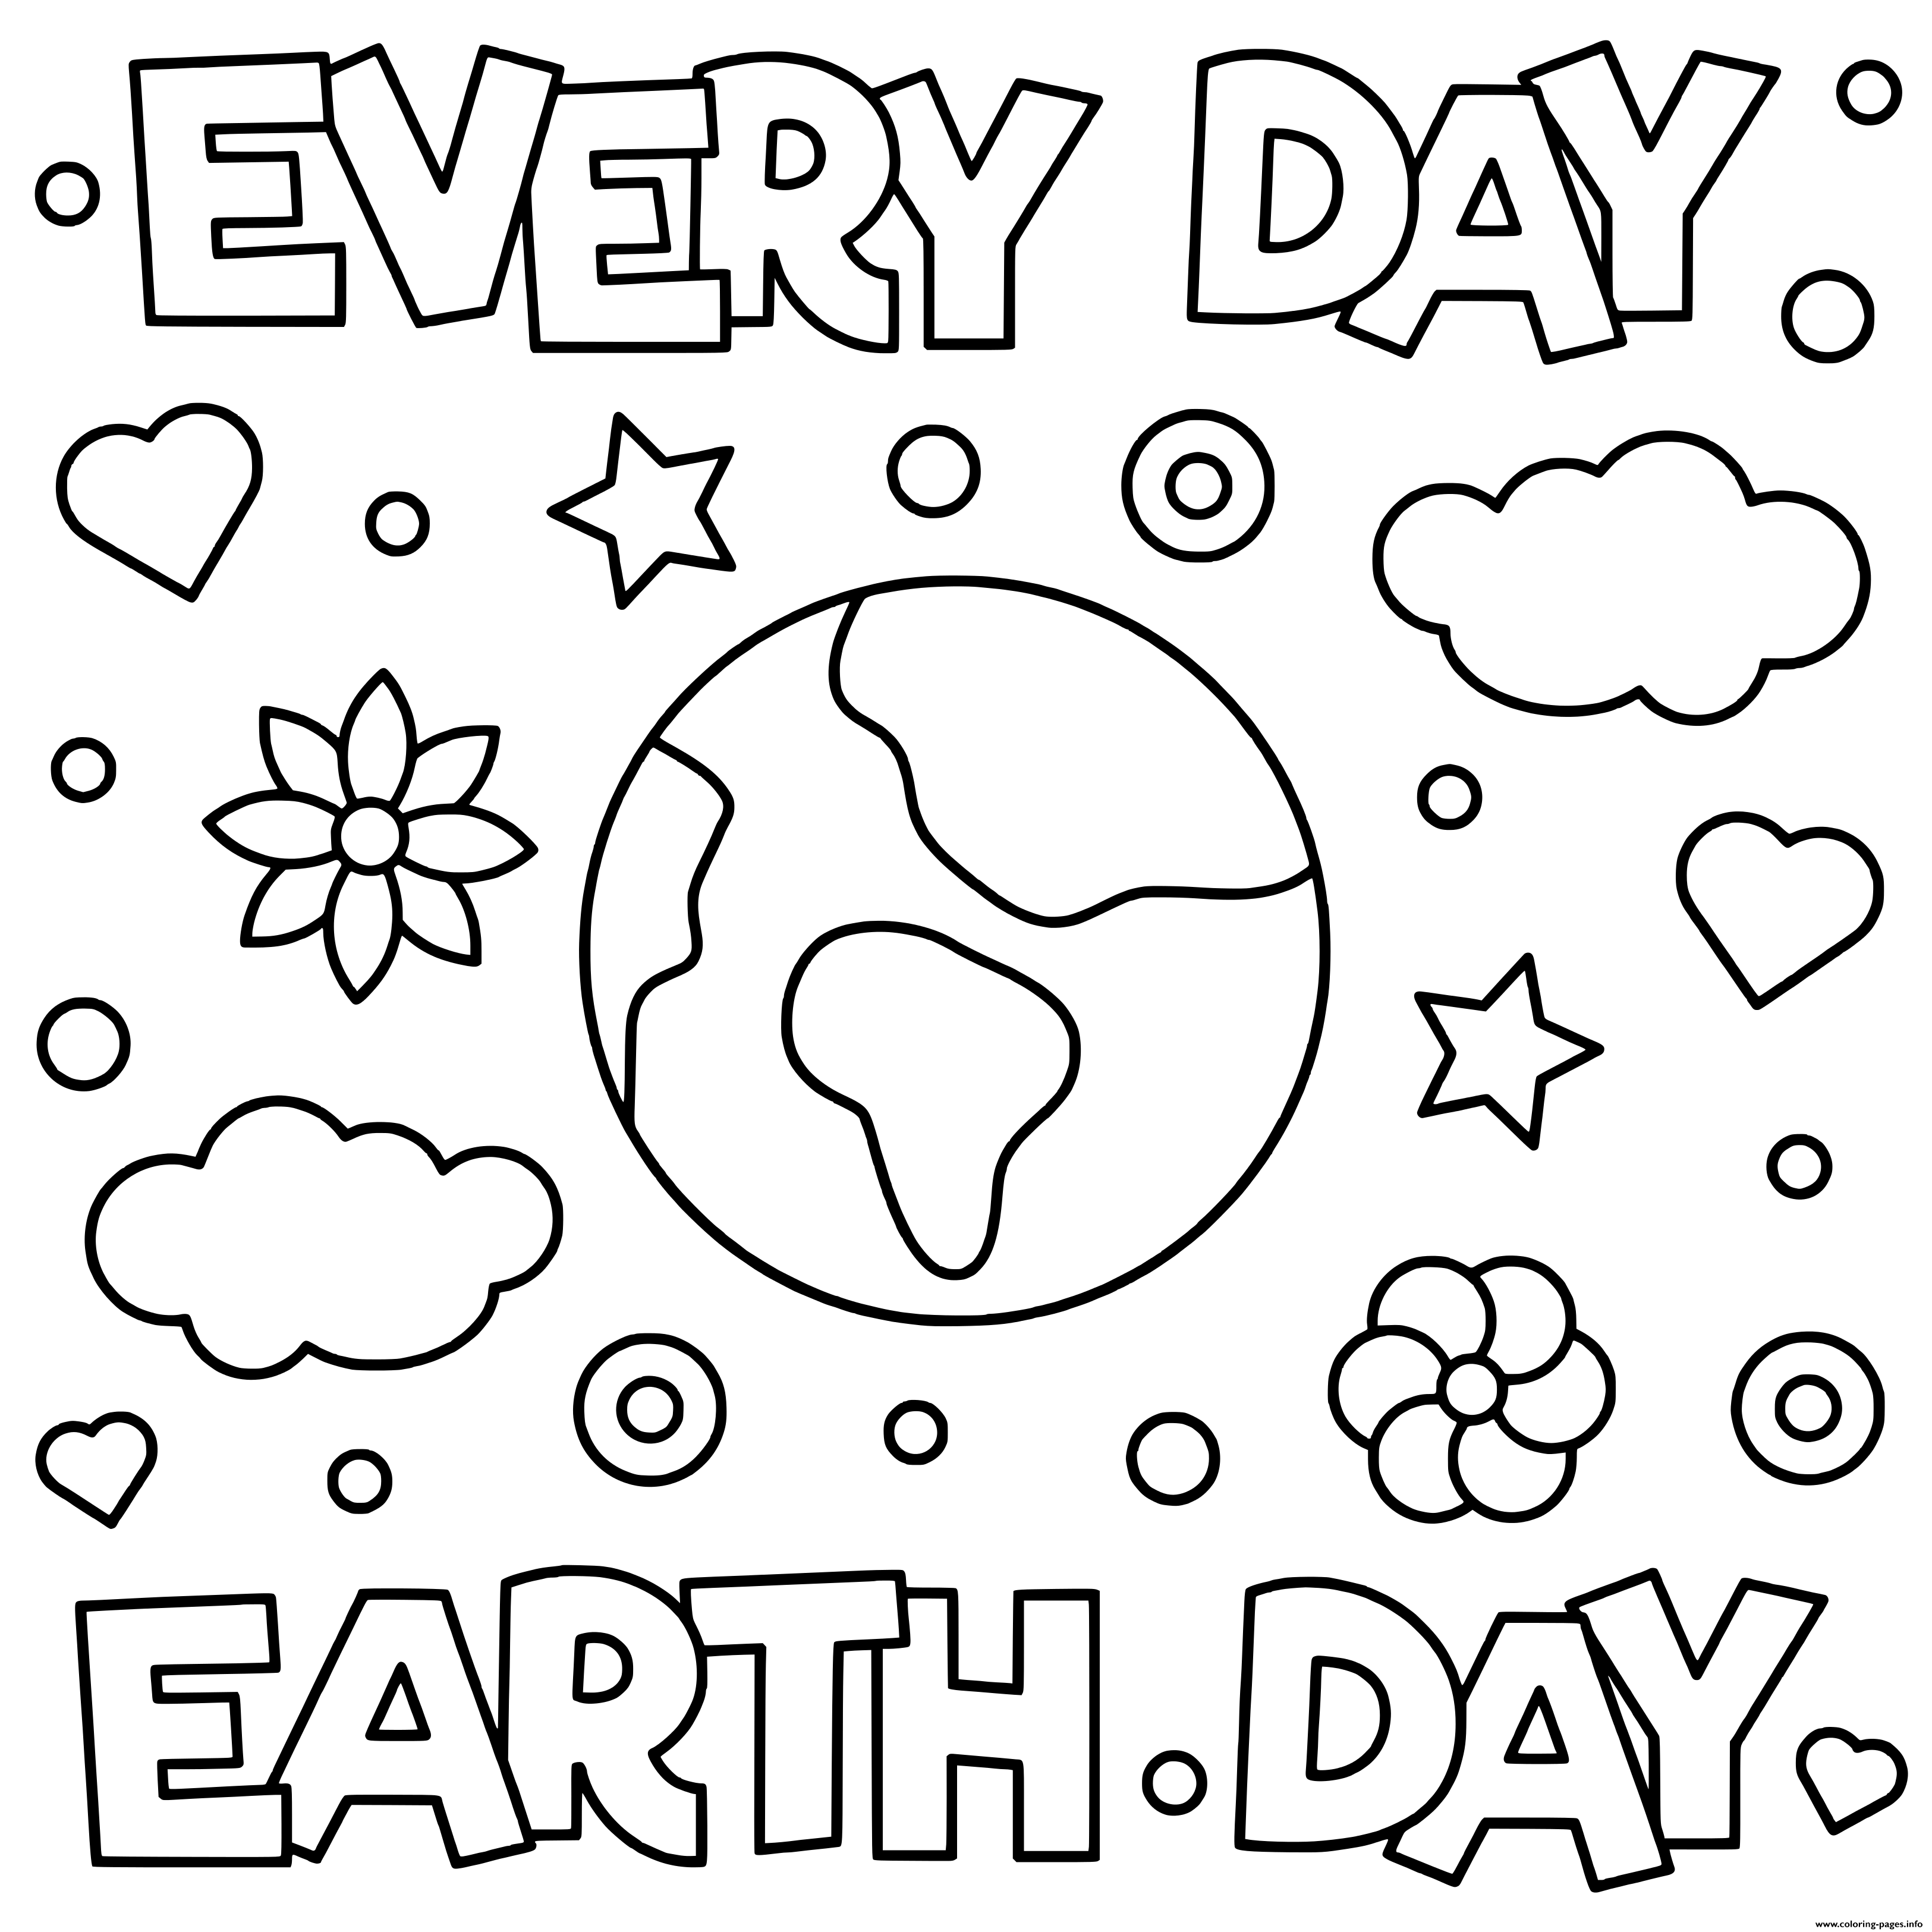 Everyday Earth Day coloring